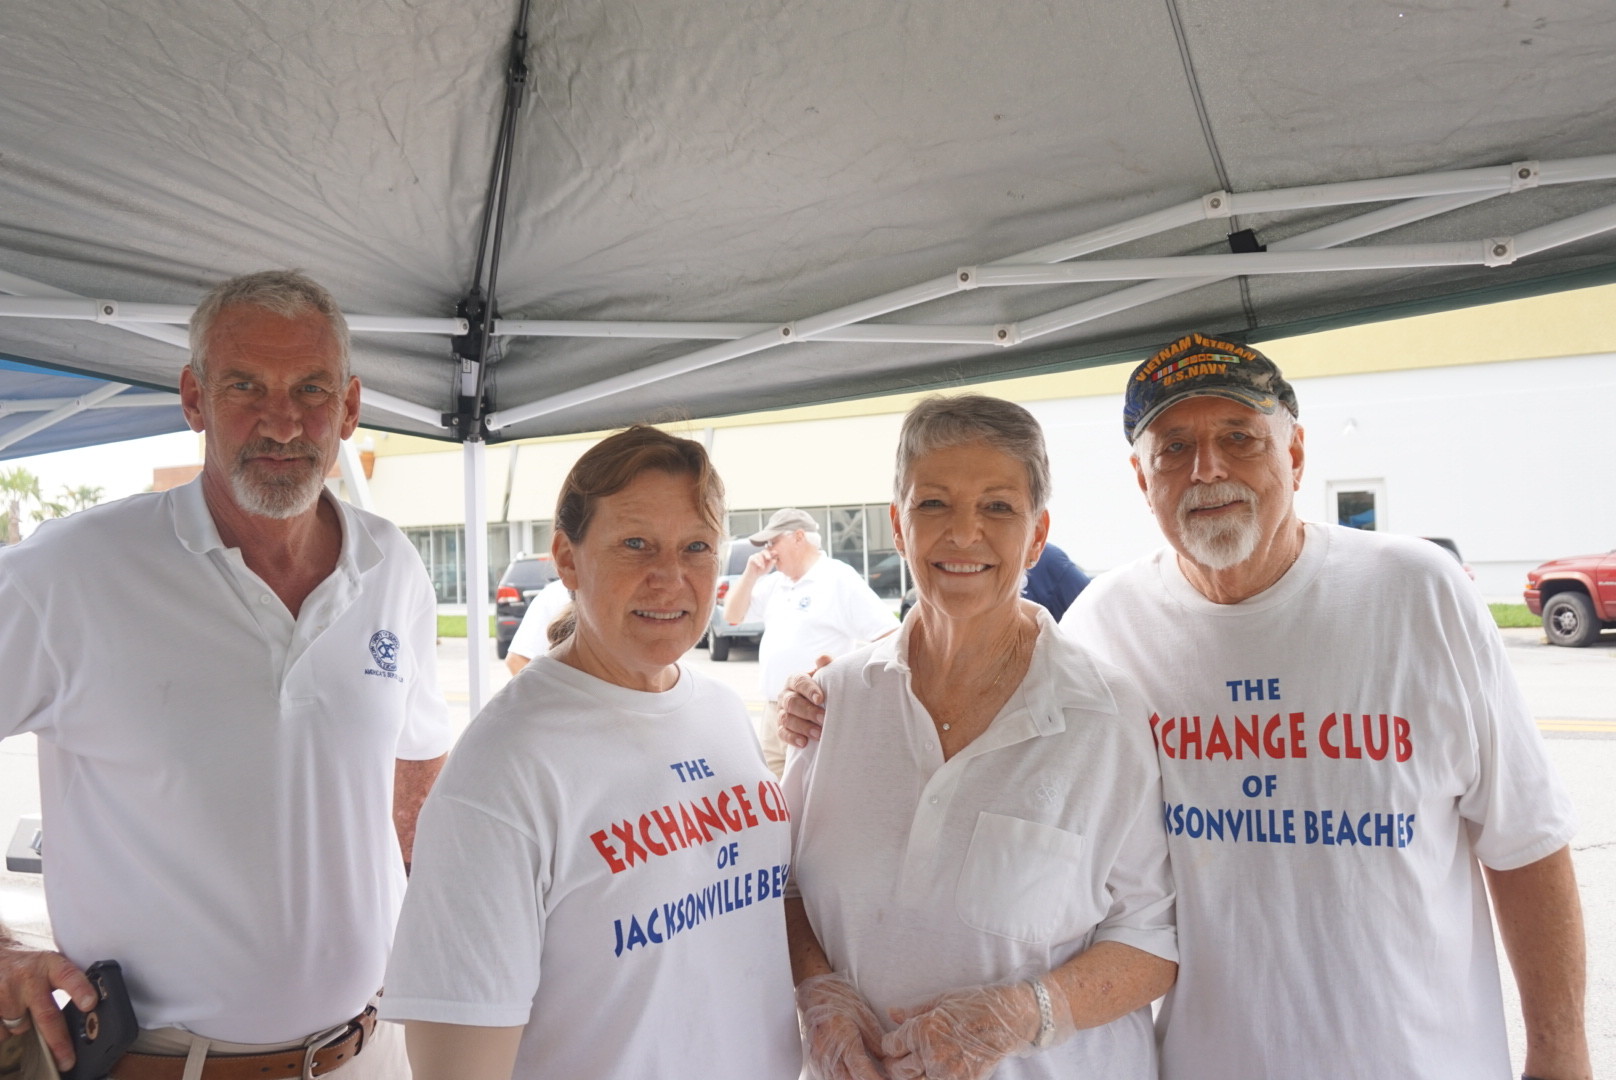 Steve Bouer, Dee Reiter, Sharon and Lyle Reimann of the Exchange Club